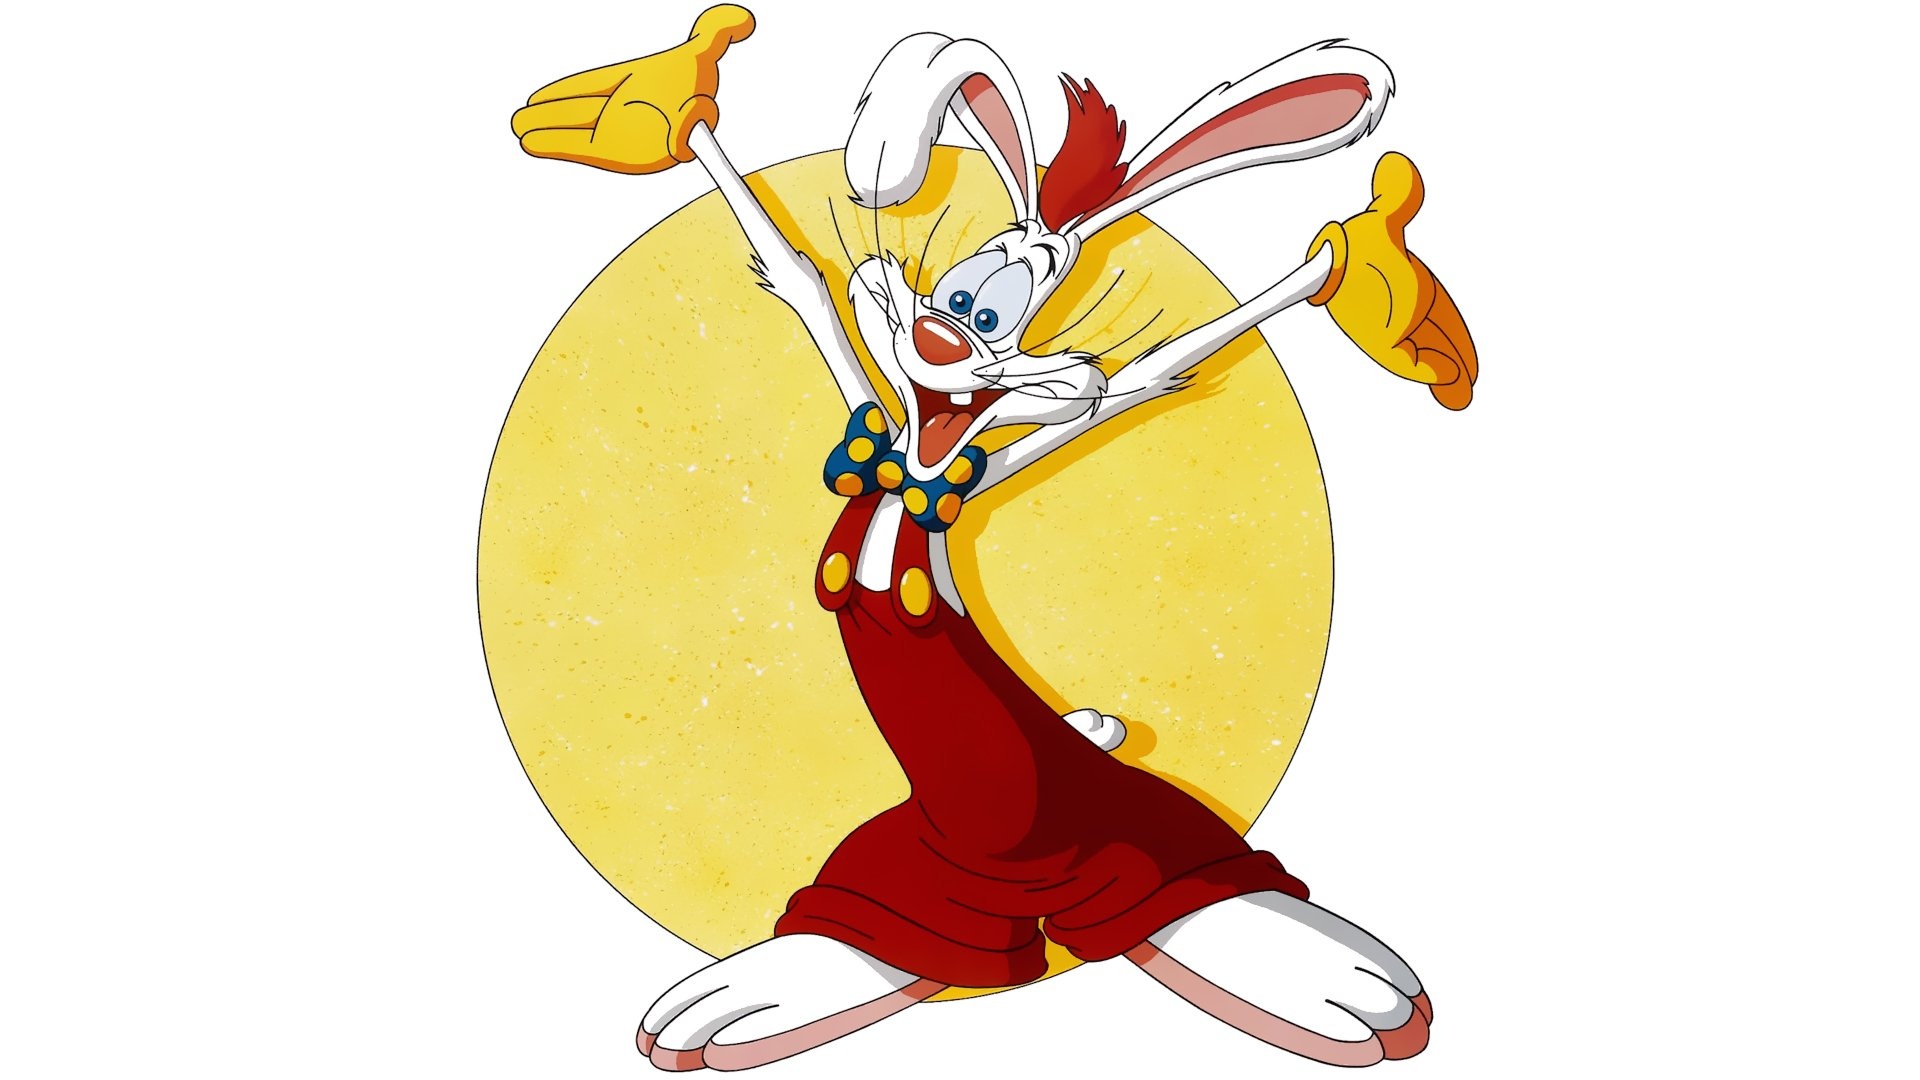 Roger Rabbit Animation, Posters and wallpapers, Movie info, 1920x1080 Full HD Desktop